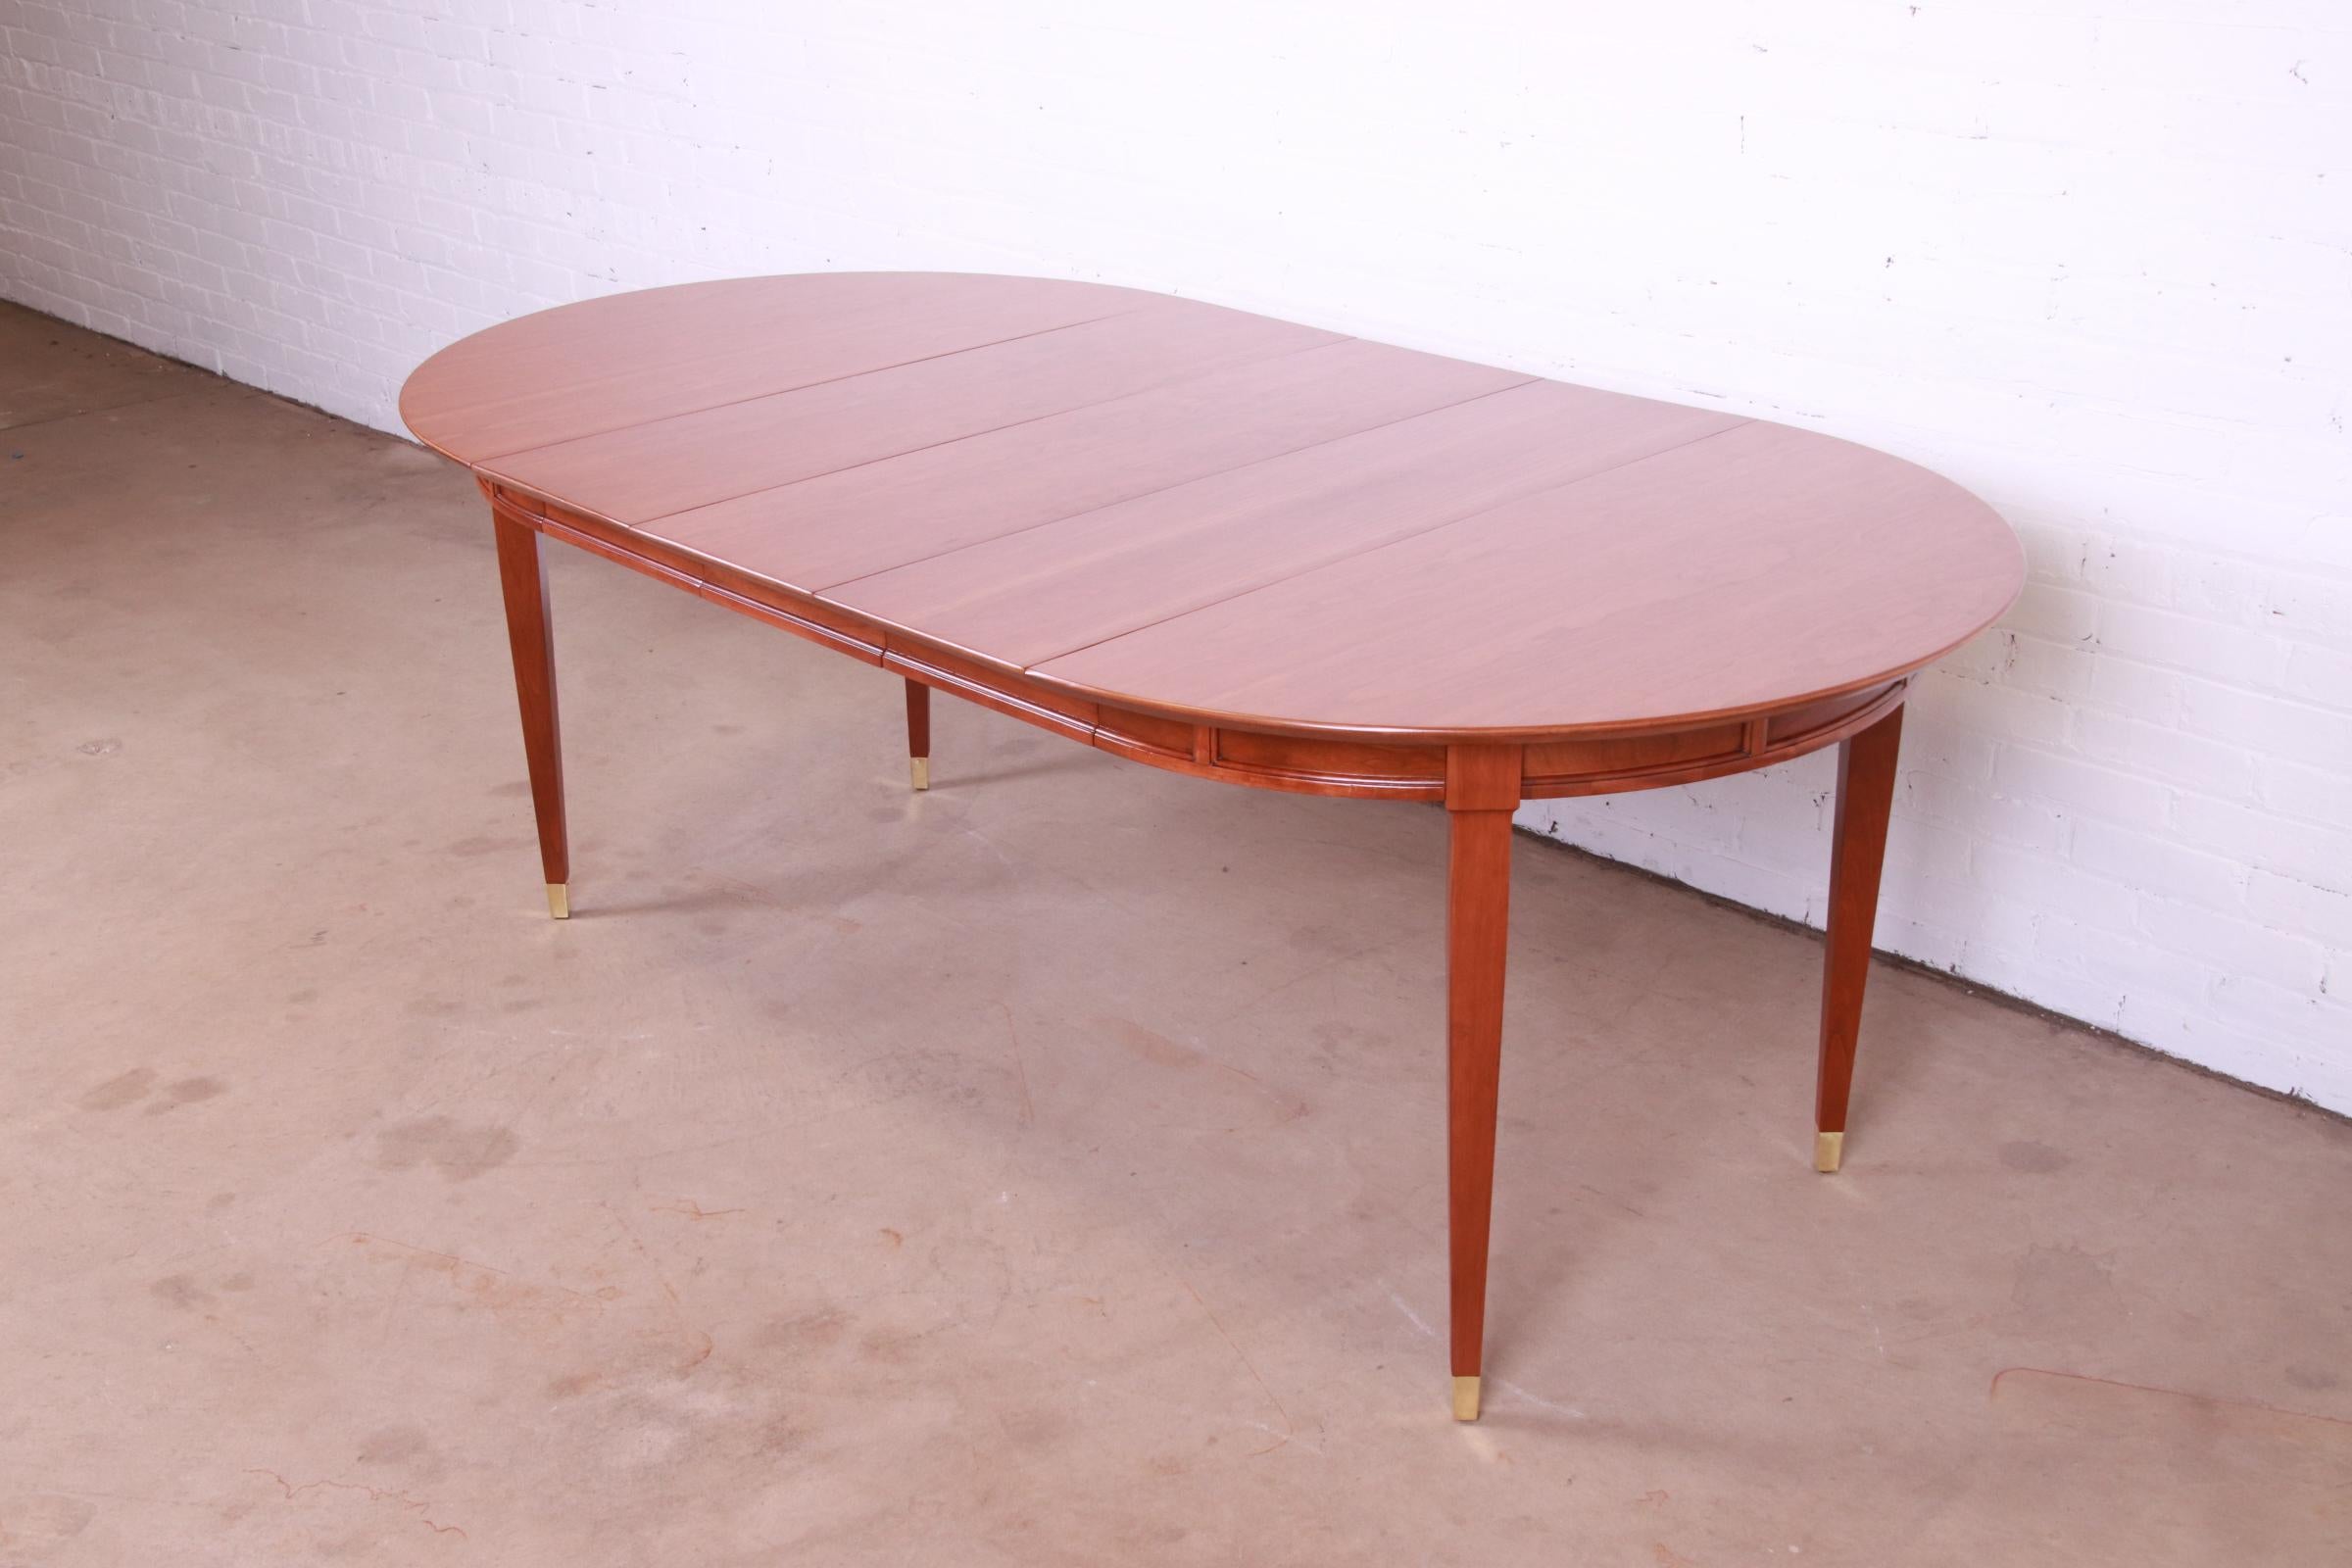 A beautiful mid-century modern French Regency style extension dining table

Recently procured from Frank Lloyd Wright's DeRhodes House

Attributed to Tomlinson

USA, Circa 1950s

Carved cherry wood, with brass-capped feet.

Measures: 44